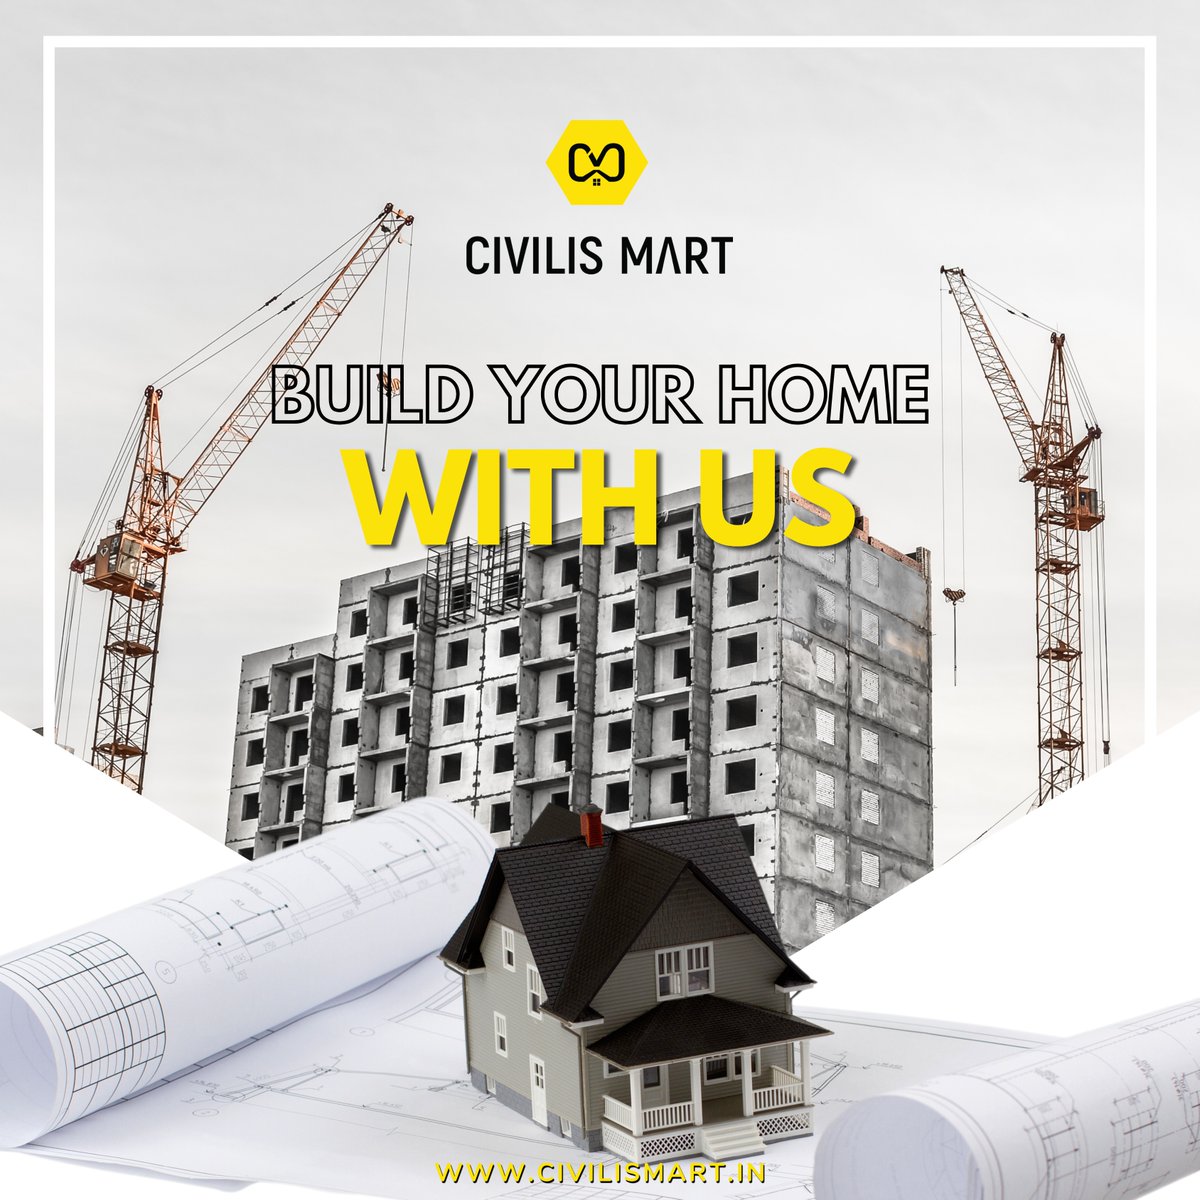 From Foundation to Finish. Build Your Home with CIVILIS MART. Get your free architecture plan now! 🏡
Just the first step towards your dream home.
Visit: civilismart.in
#civilismart #surat #suratupdates
#suratdreams #makingdreamscometrue #suratconstruction